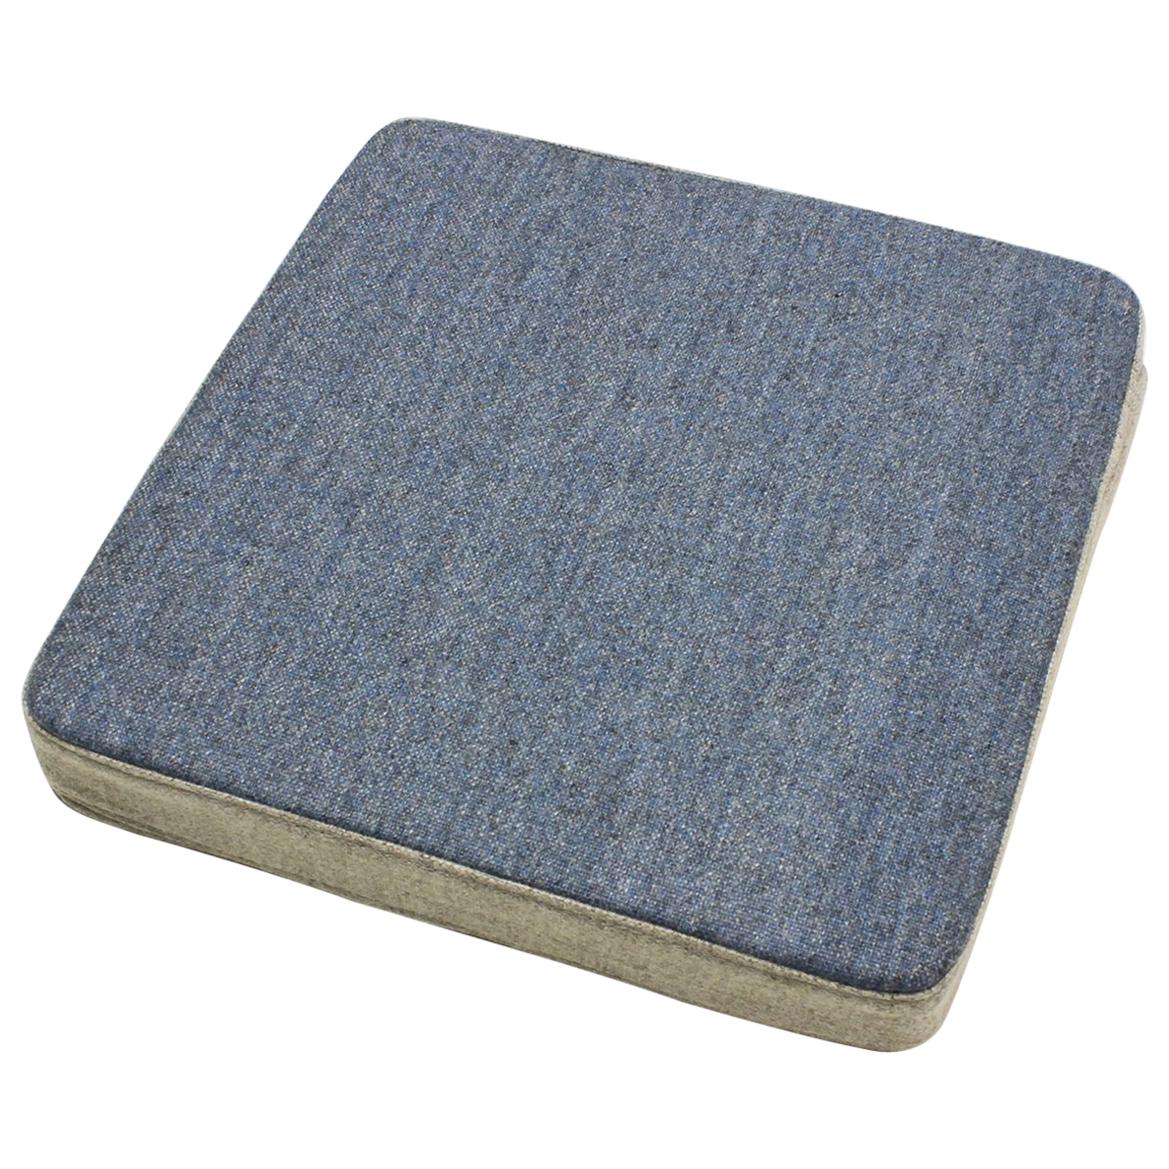 OPE, Ope Select, Cushion or Sound Absorber, Blue For Sale